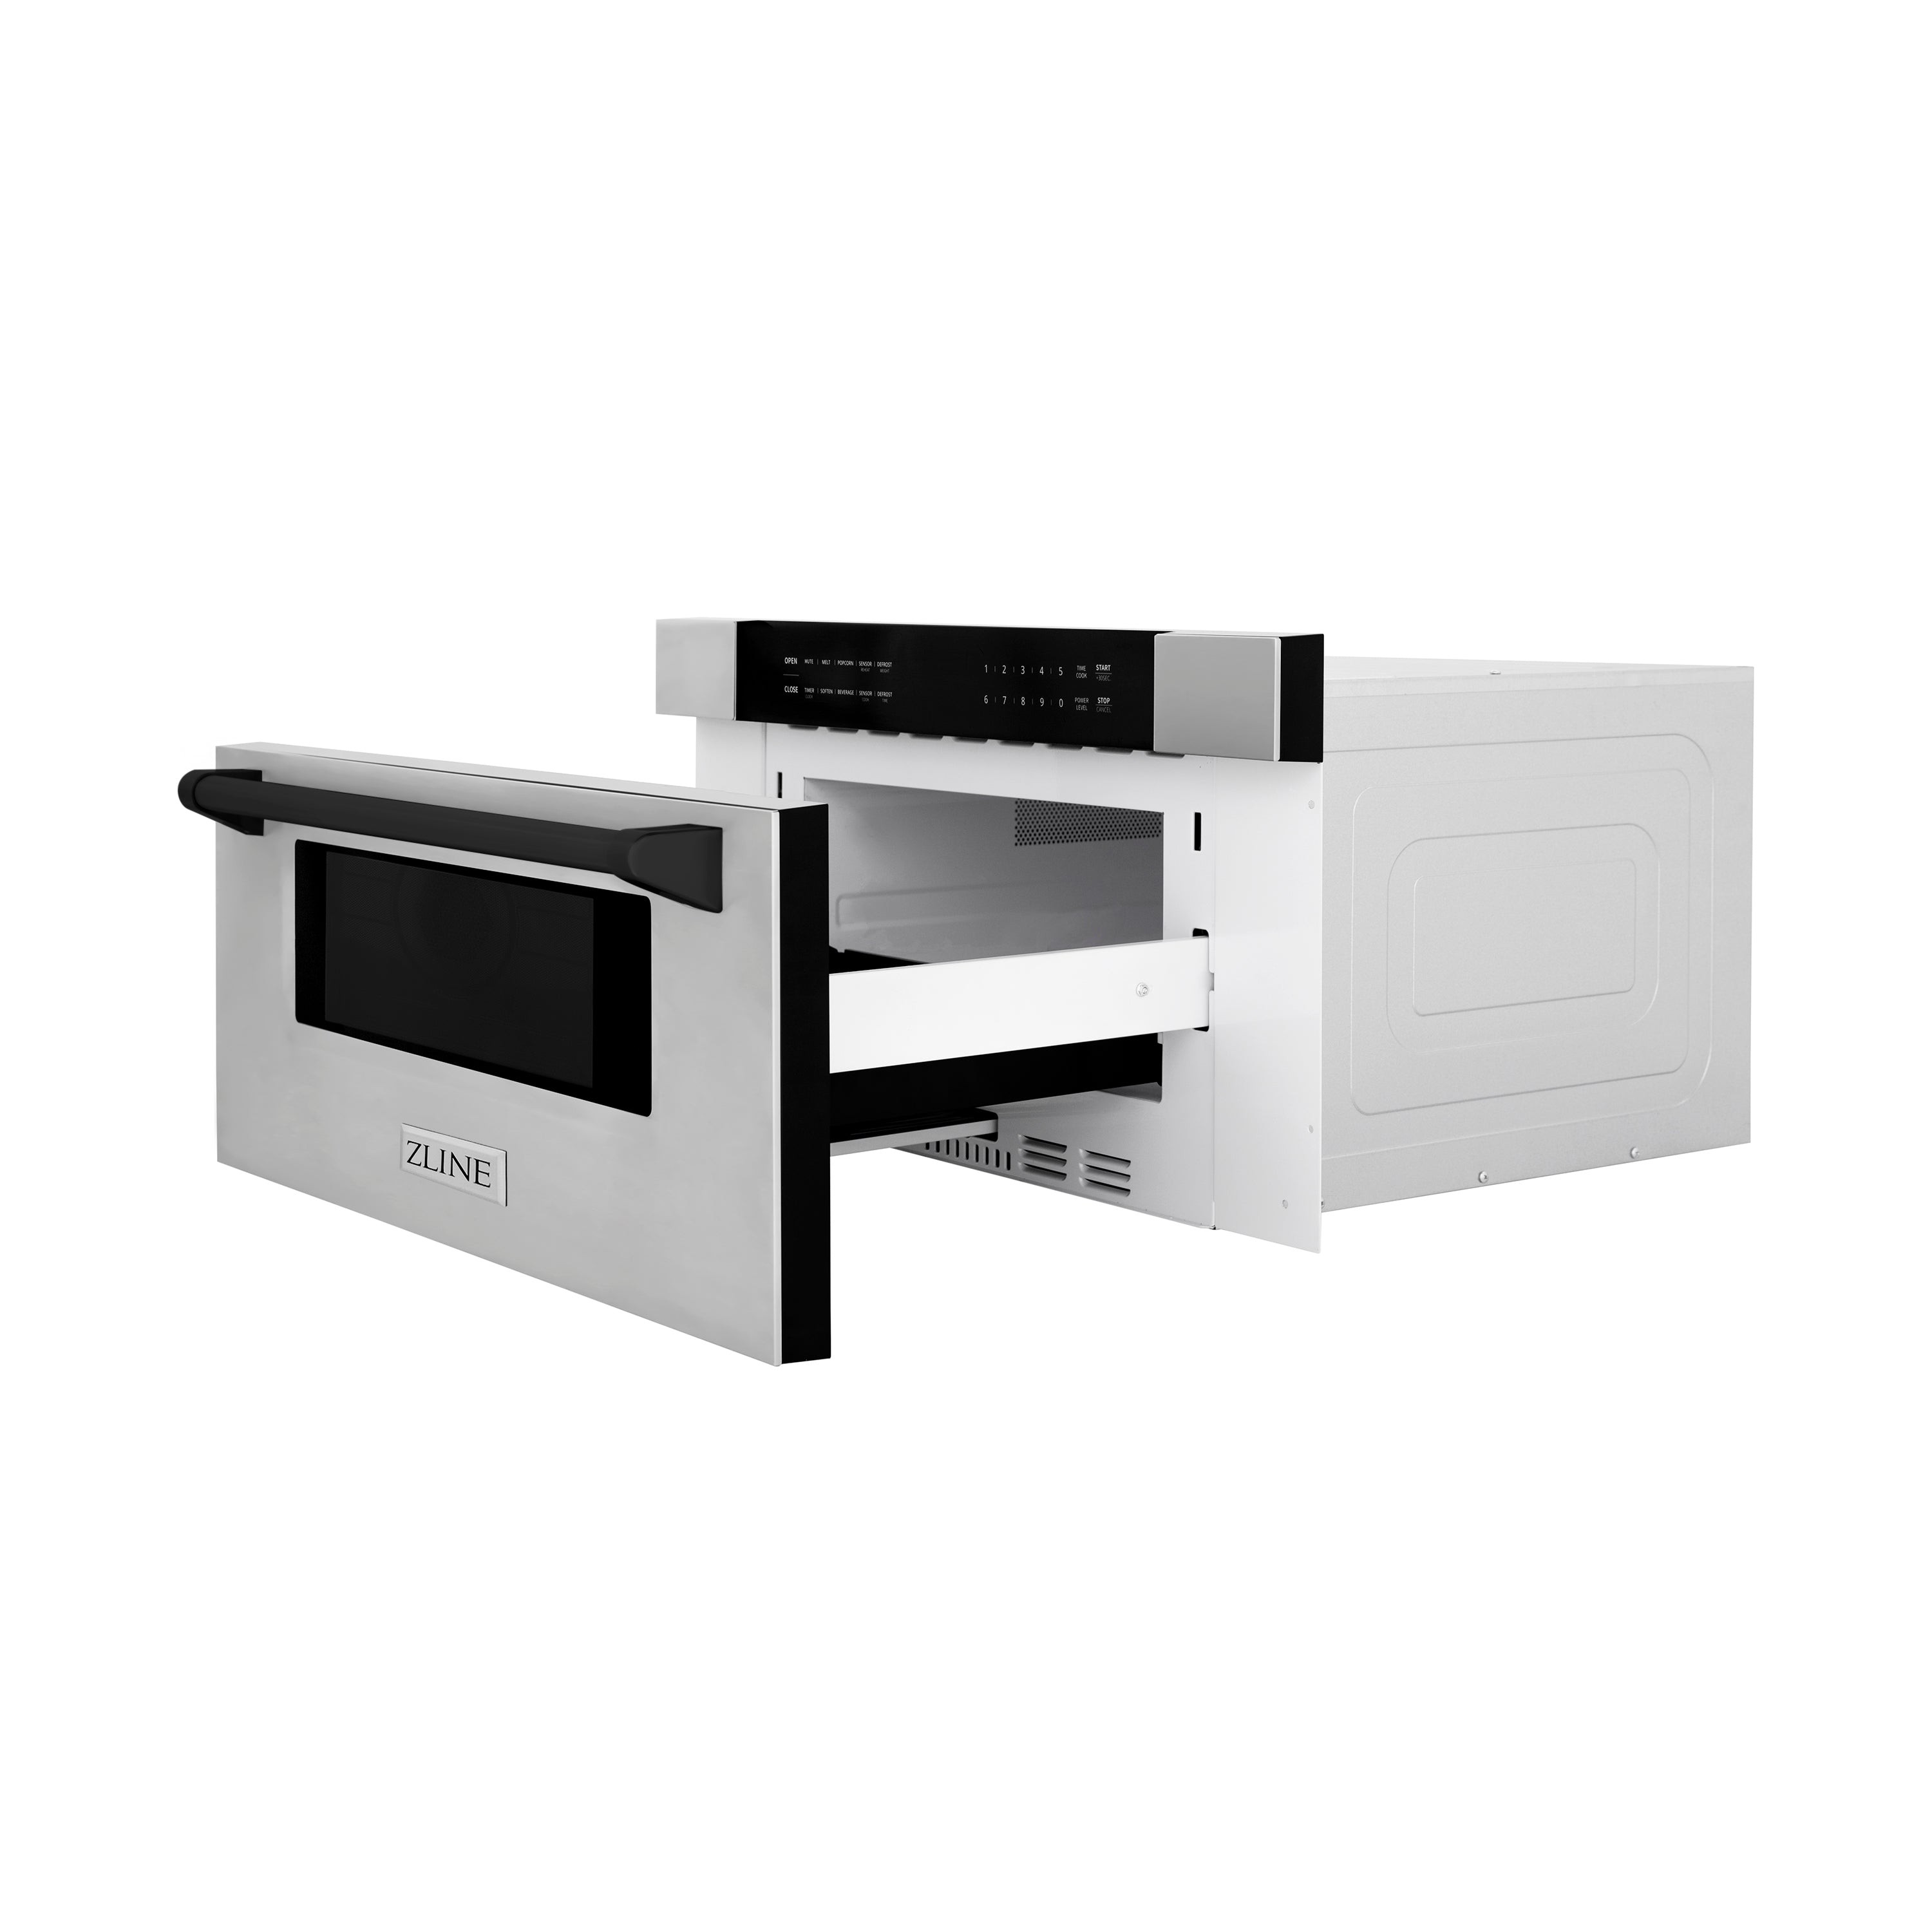 ZLINE Autograph Edition 30" 1.2 cu. ft. Built-In Microwave Drawer in Stainless Steel with Matte Black Accents